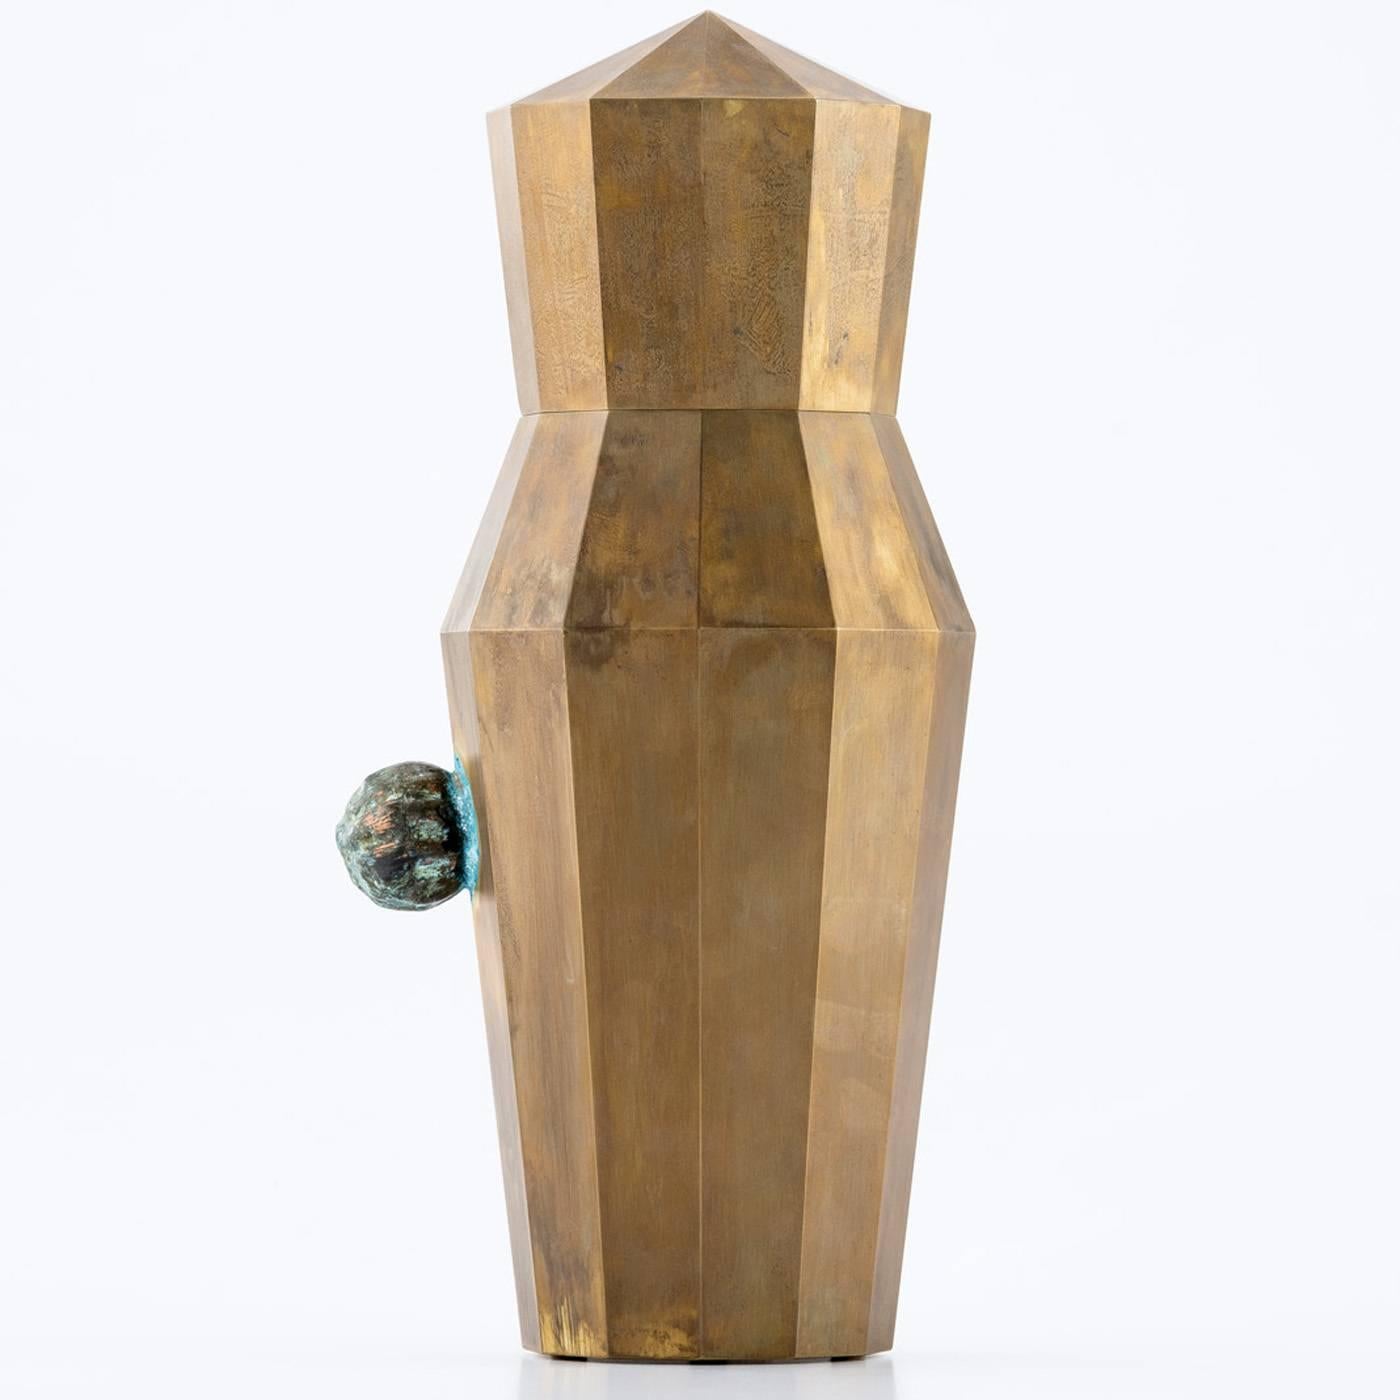 This exquisite vase is crafted using a technique where a CNC cutting machine is used to shape brass plates which have been oxidized by hand. This technique allows for the creation of sharp and precise bends and edges. This vase also features a